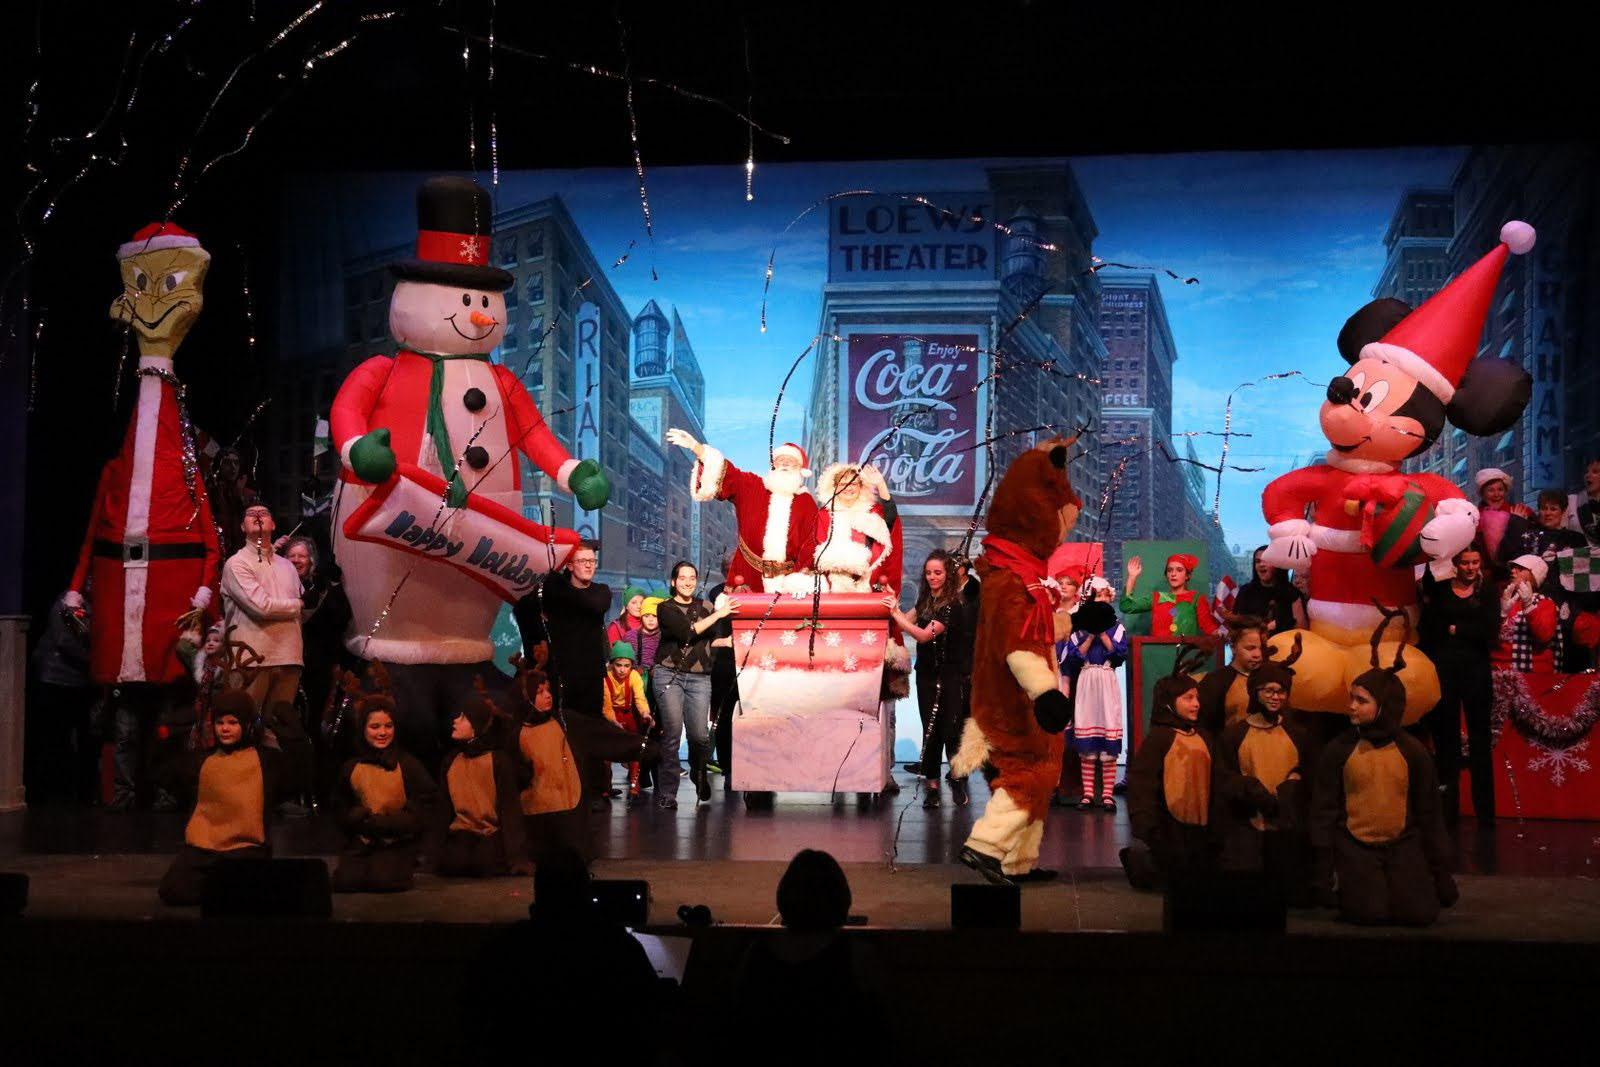 A Christmas parade scene featuring Santa and Mrs. Claus in a sleigh surrounded by floats against a New York Times Square drop.